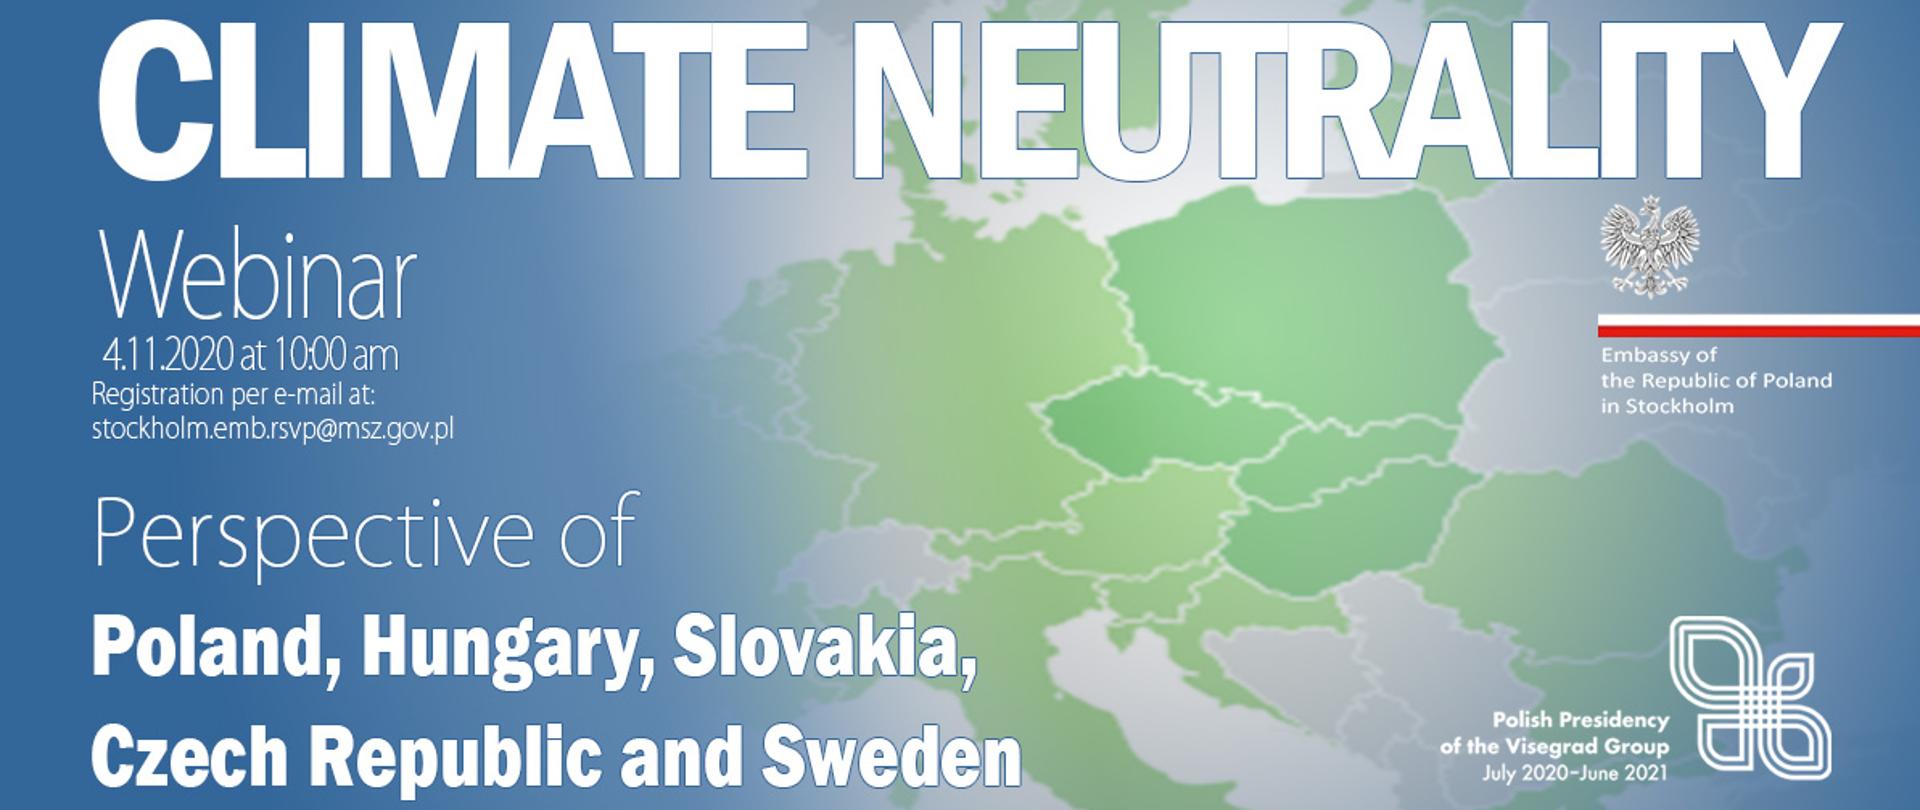 Invitation to the Climate Neutrality Webinar. Perspective of V4 and SE